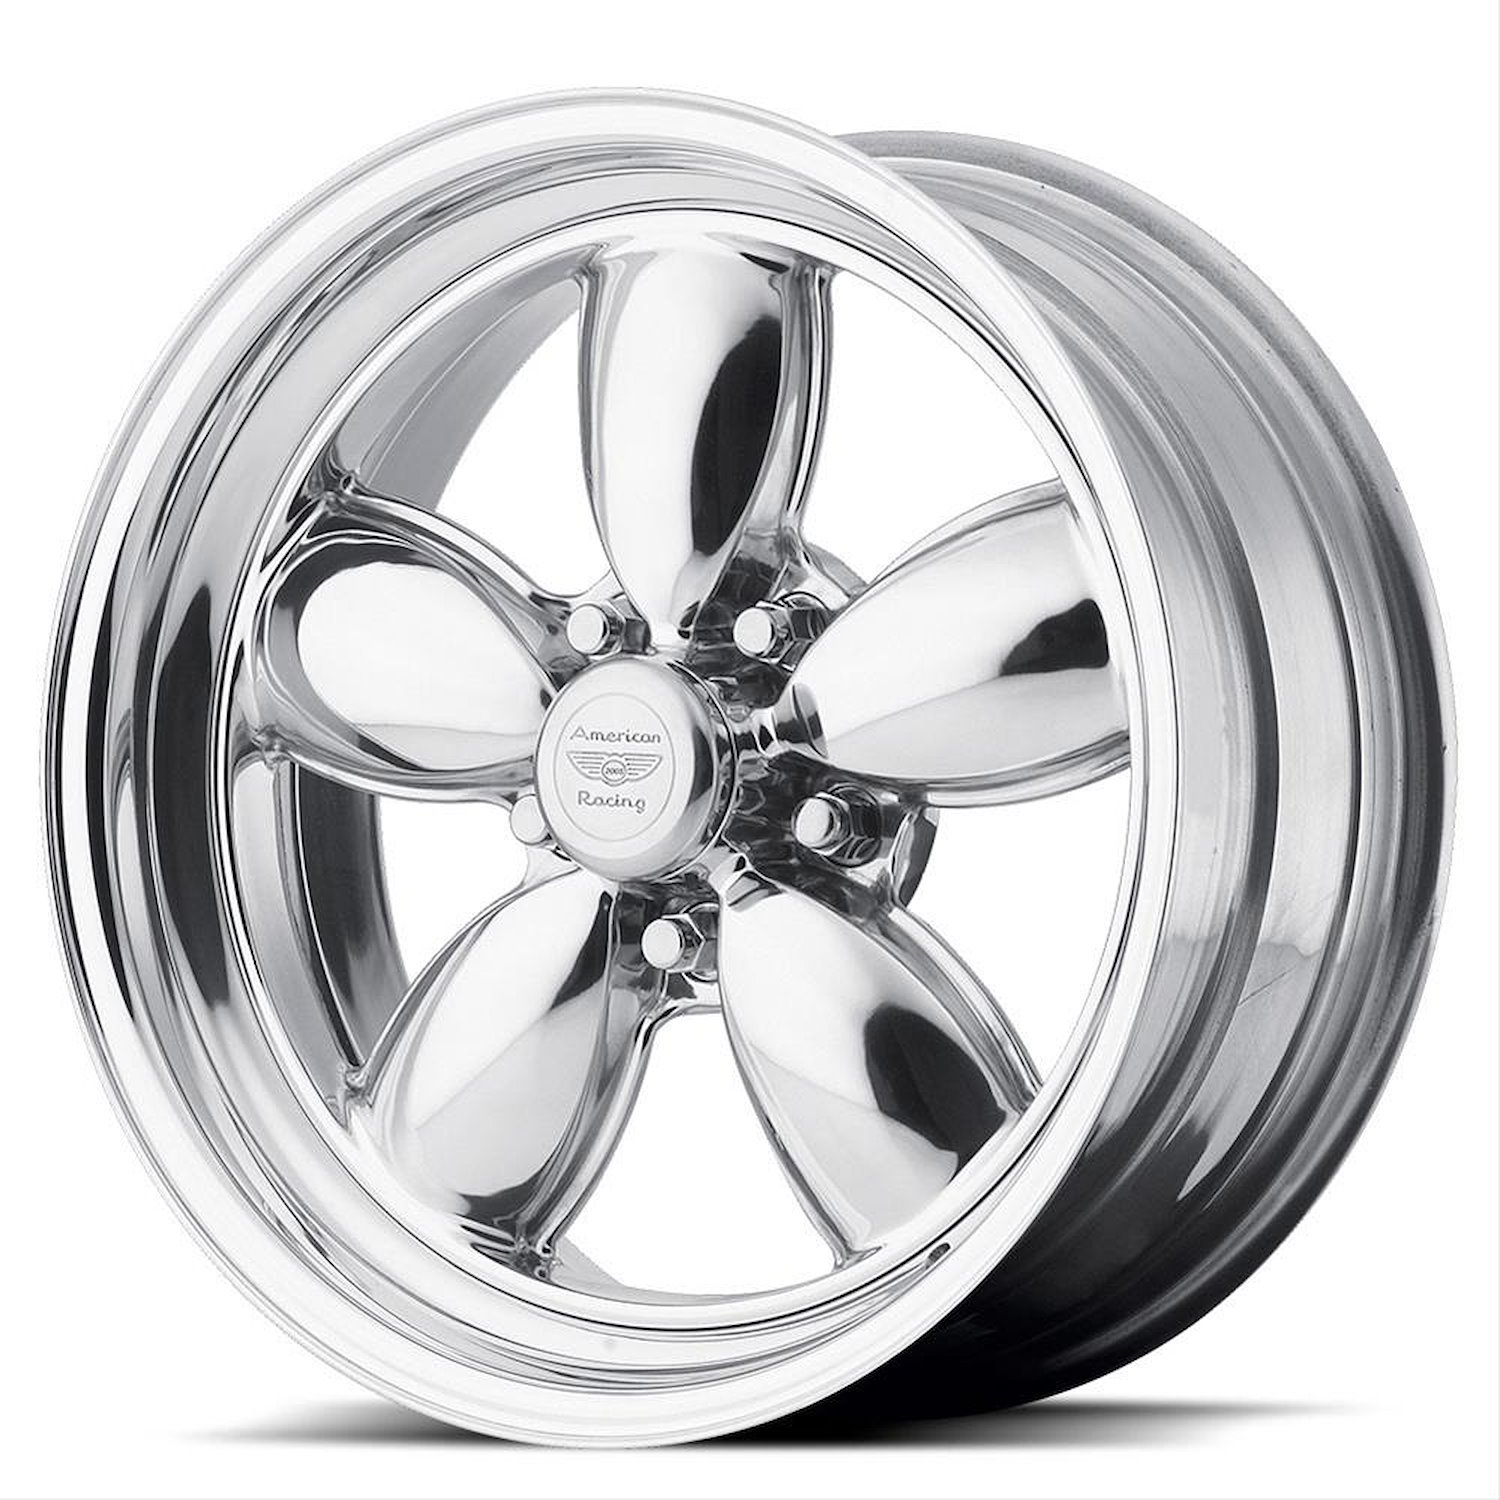 AMERICAN RACING CLASSIC 200S TWO-PIECE POLISHED 17 x 8 5x4.5 13 5.01